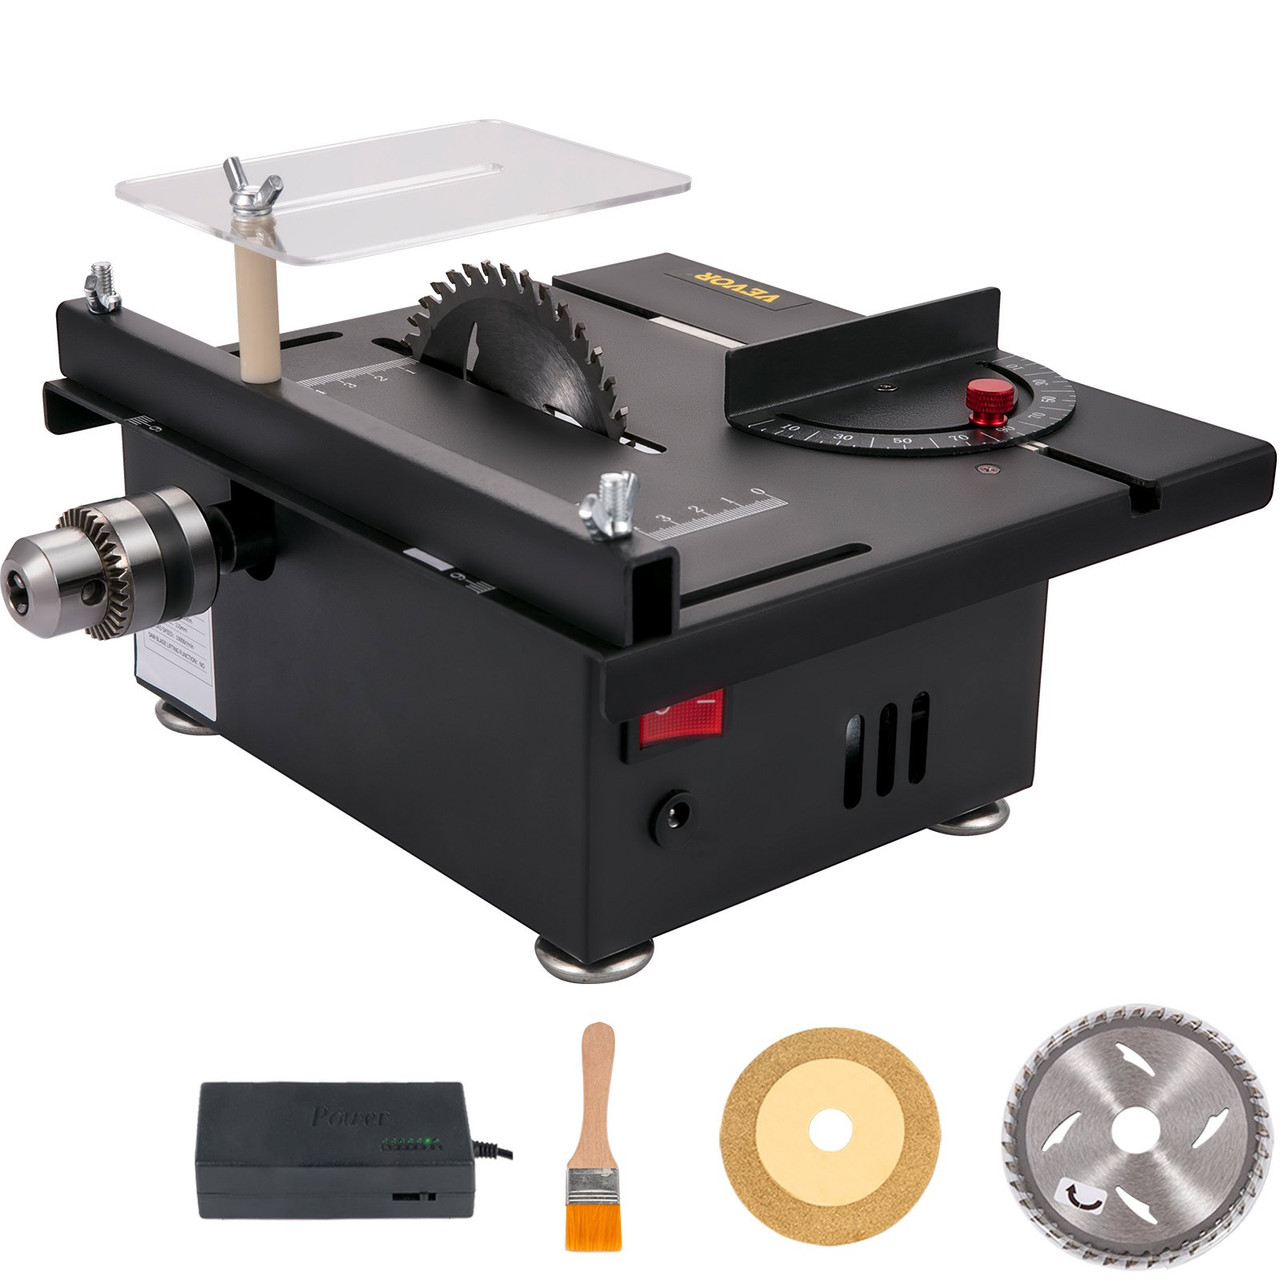 Mini Table Saw, 96W Hobby Table Saw for Woodworking, 0-90 Angle Cutting  Portable DIY Saw, 7-Level Speed Adjustable Multifunctional Table Saws,  1.3in